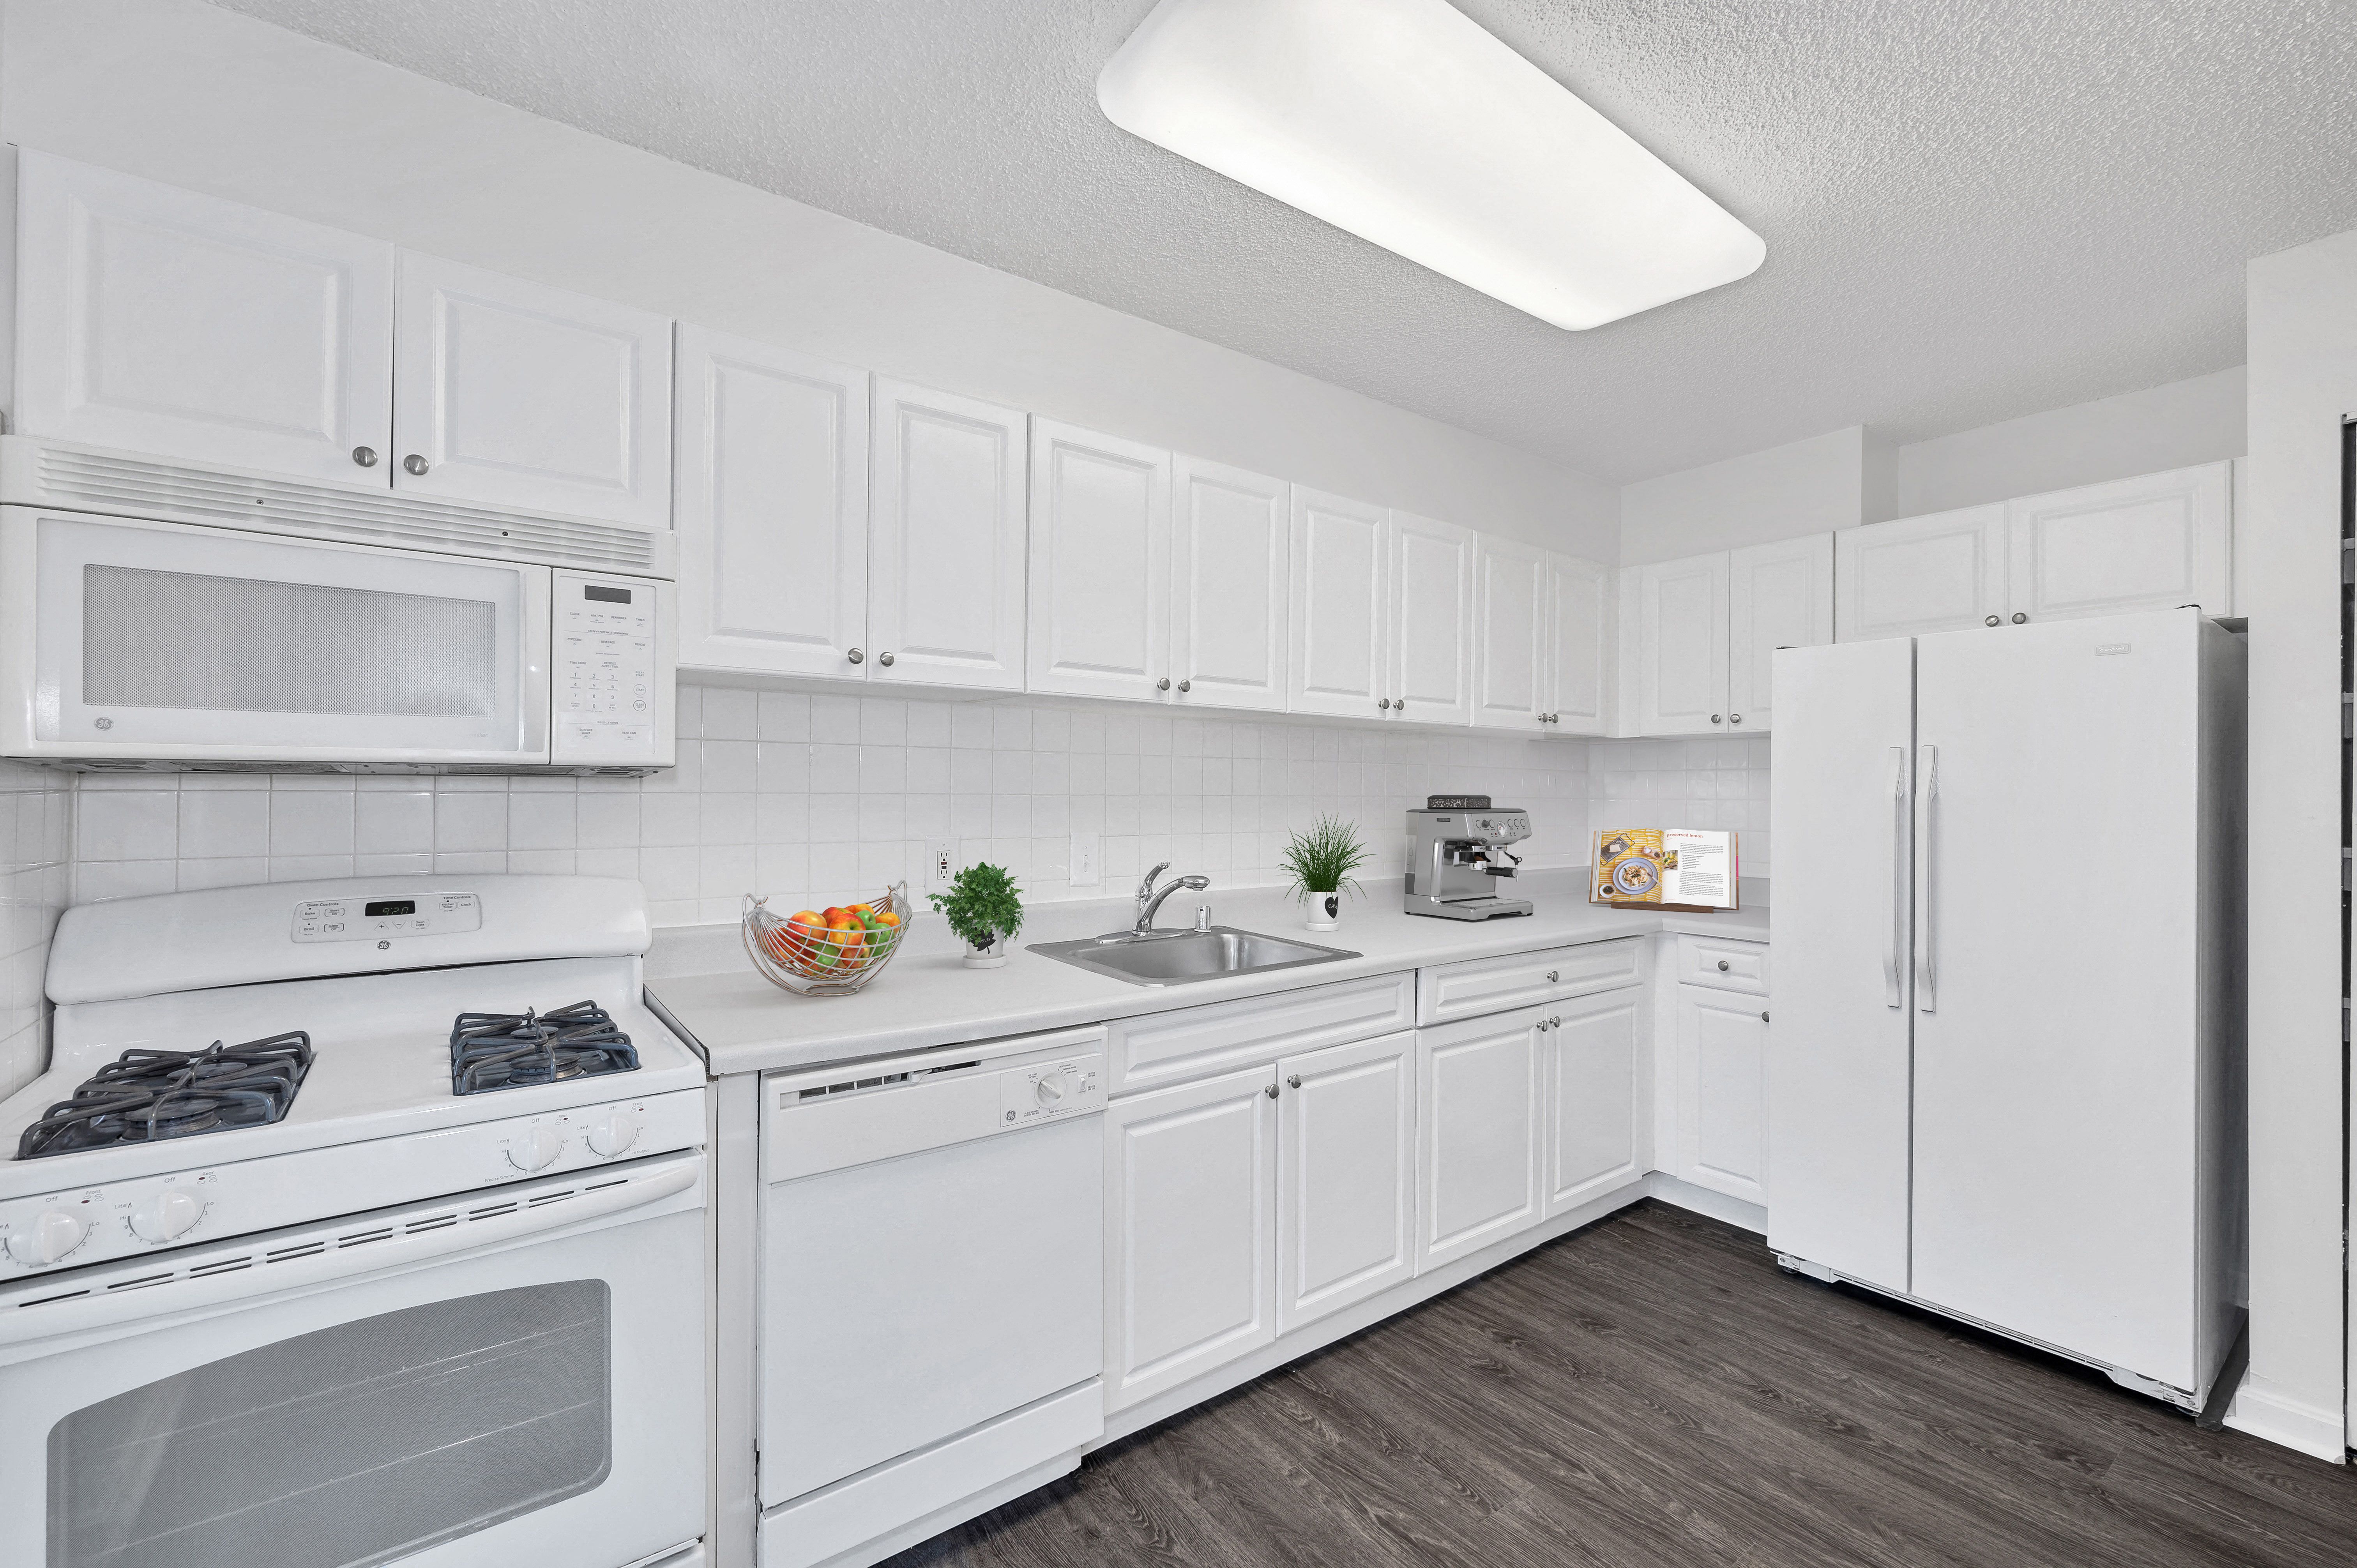 Updated kitchens with white cabinets